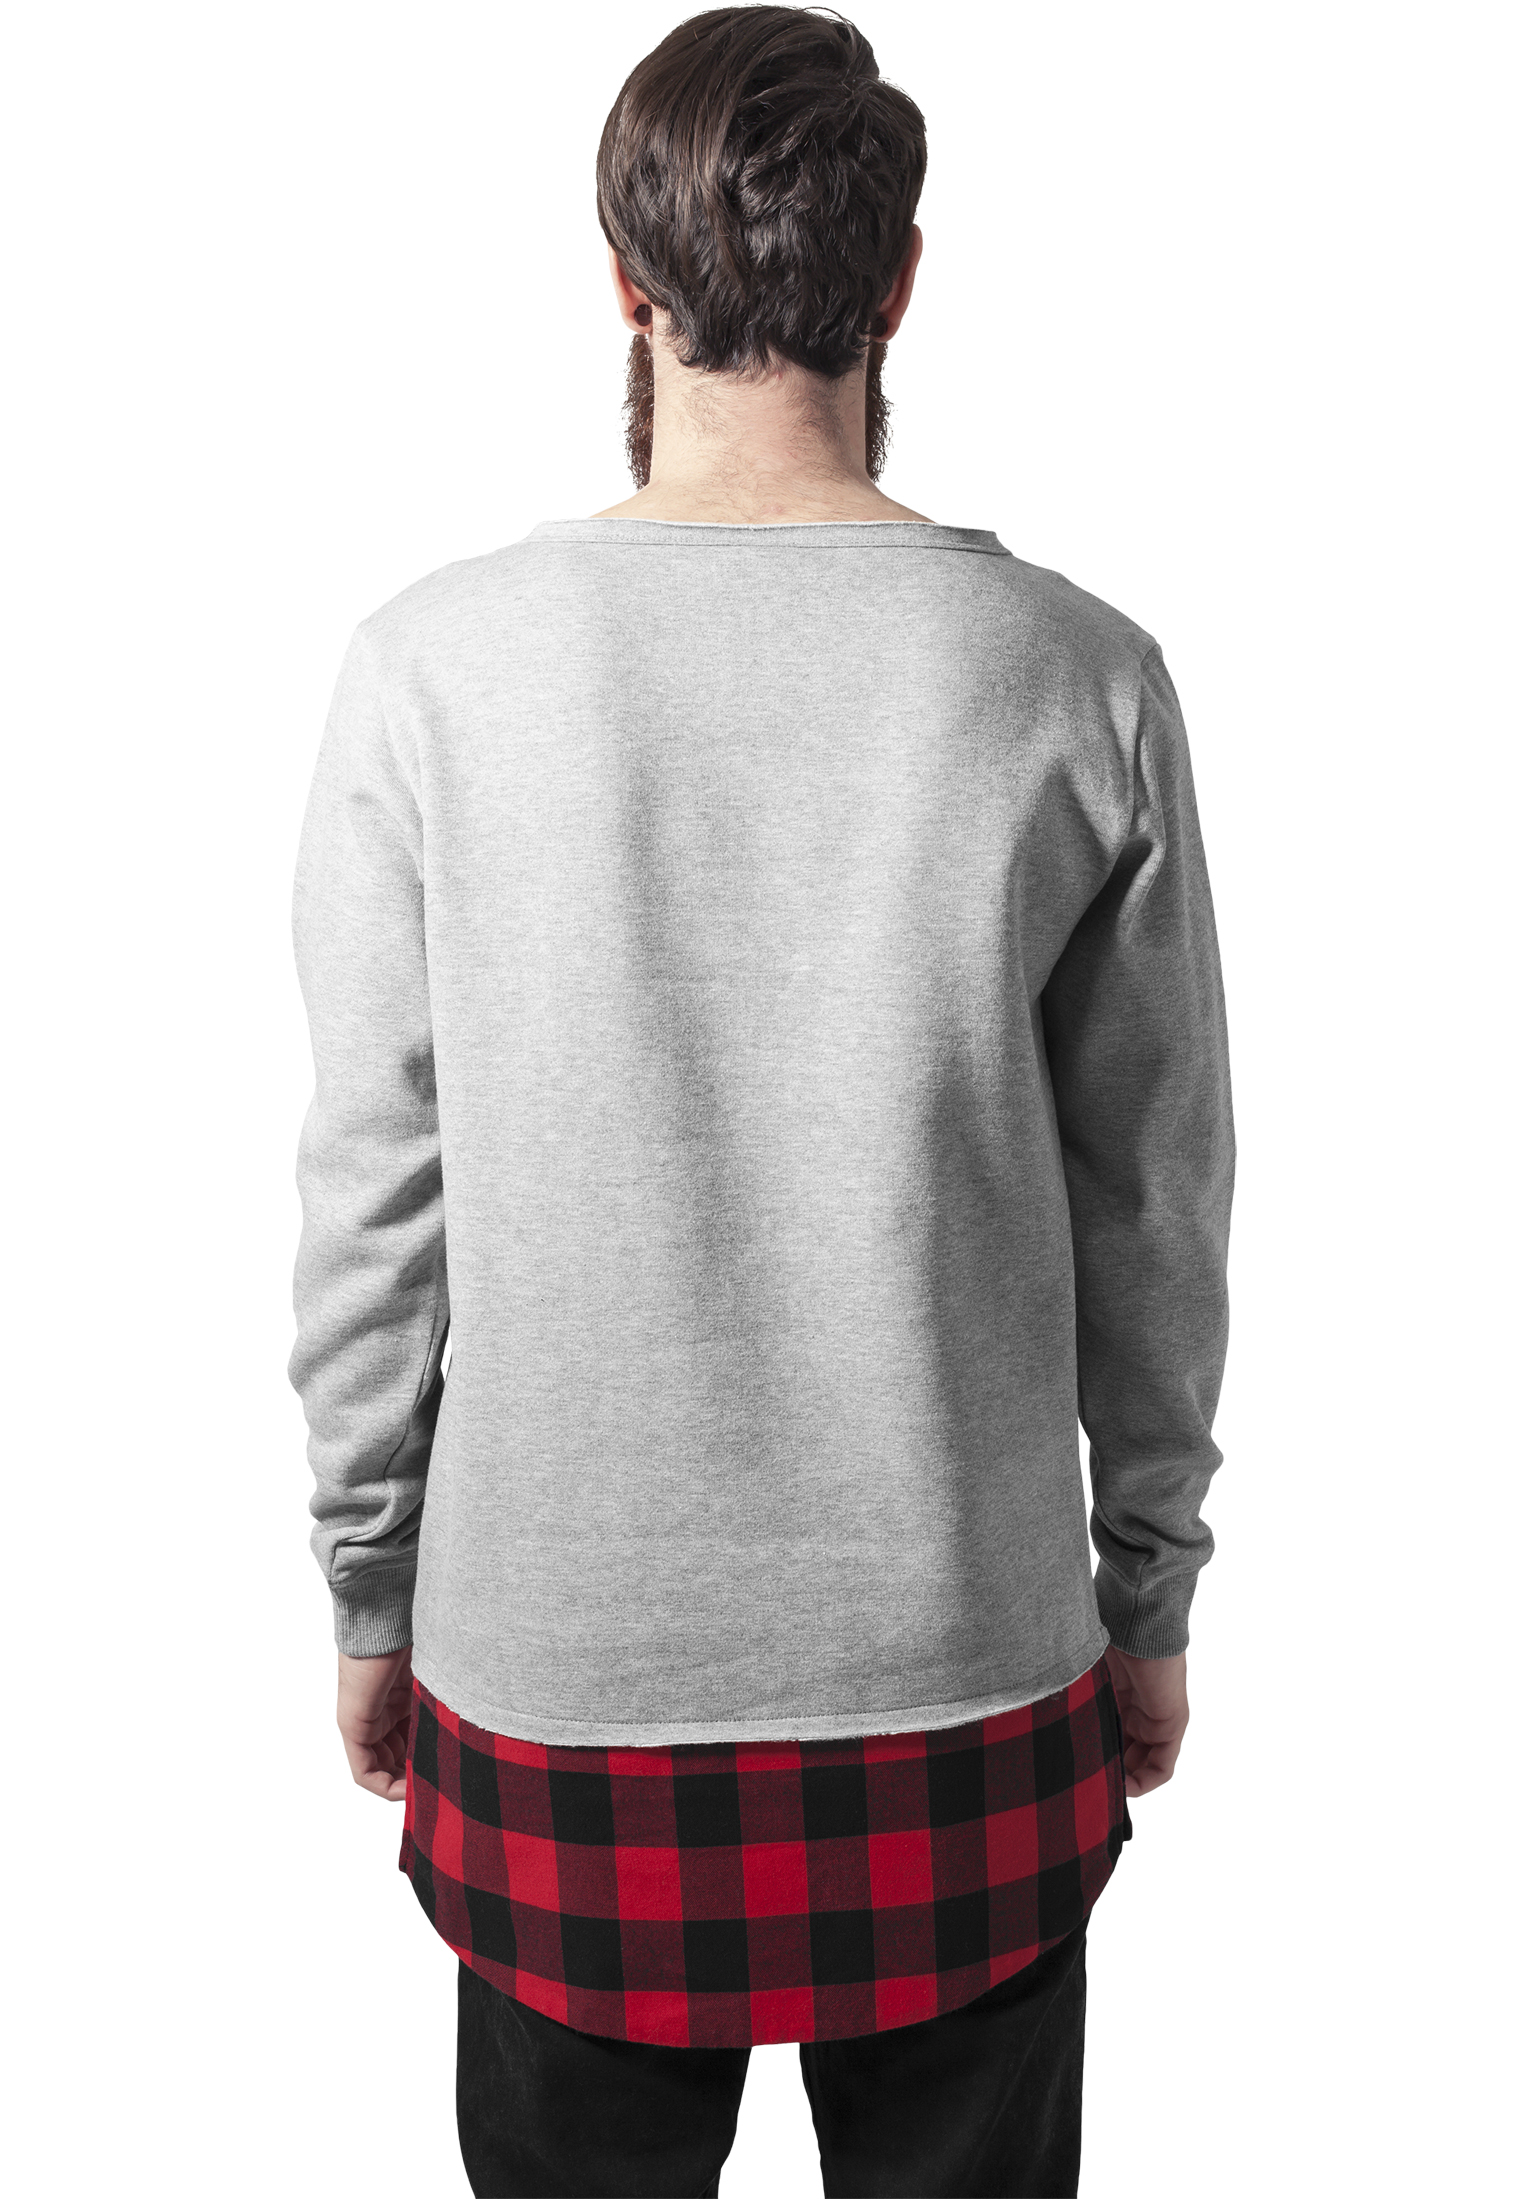 Crewnecks Long Flanell Bottom Open Edge Crewneck in Farbe gry/blk/red